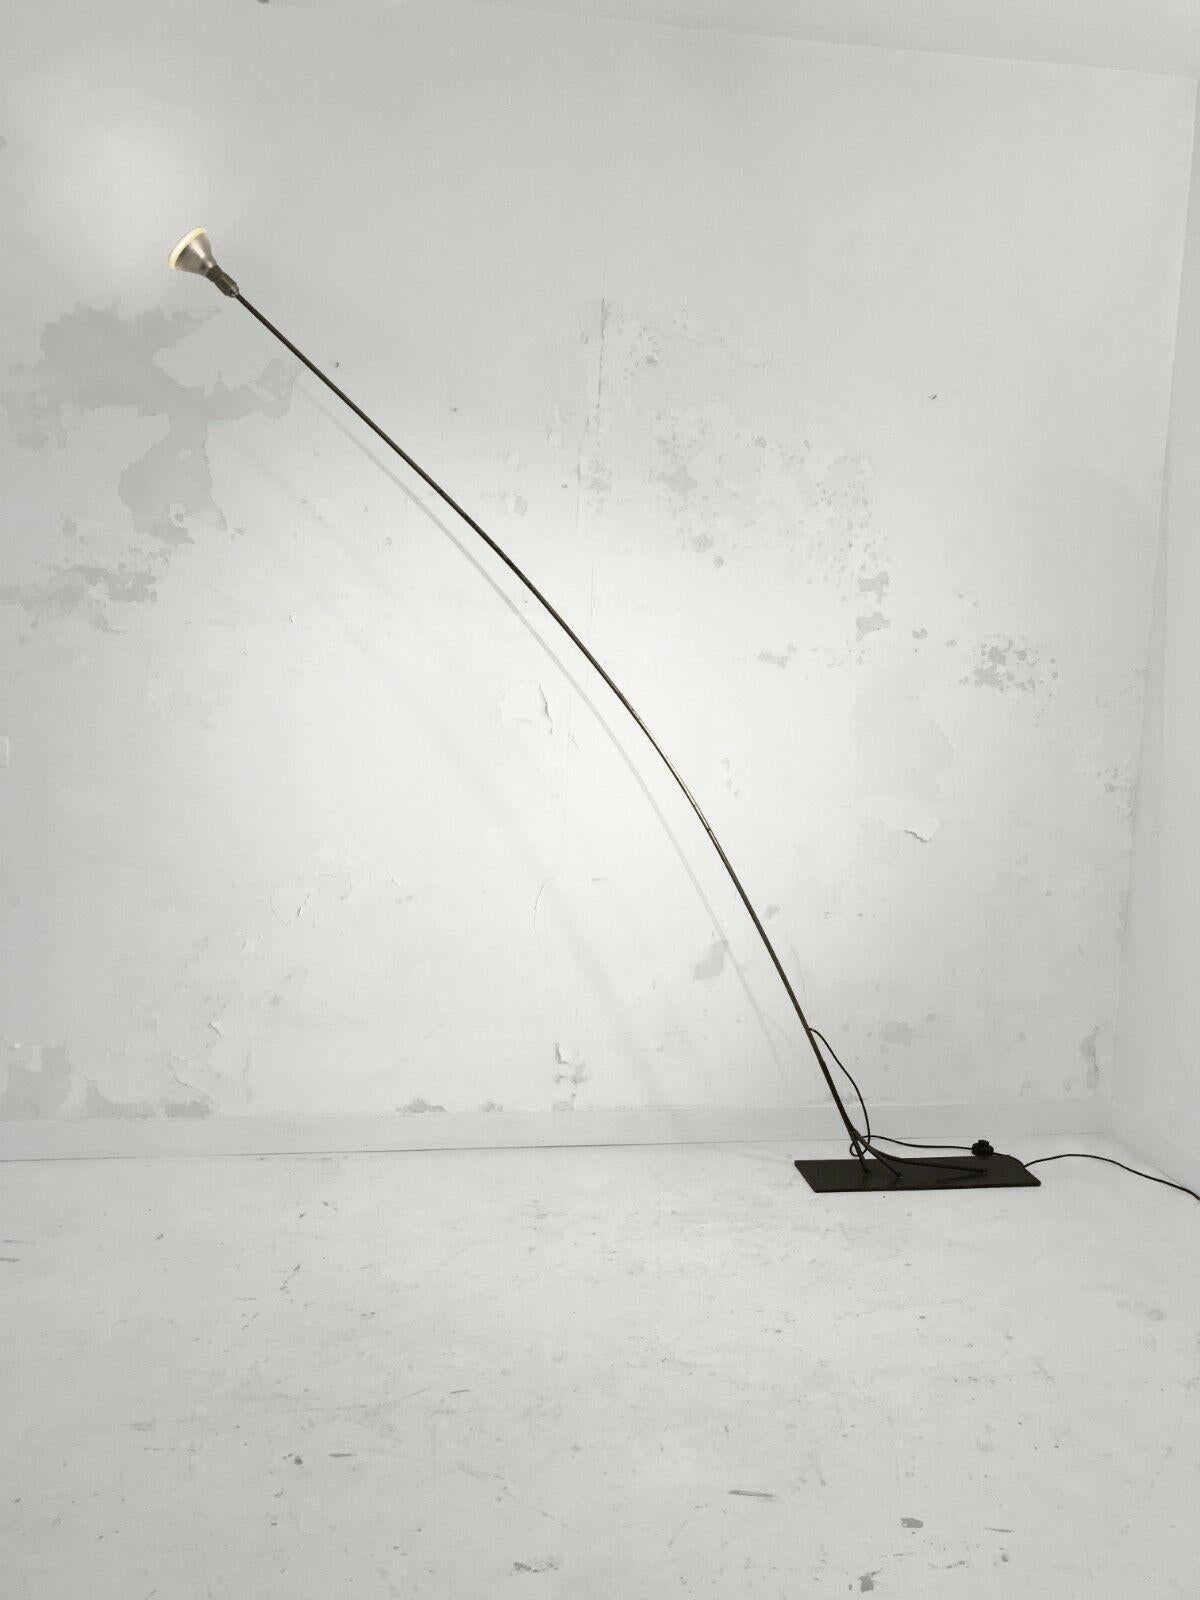 A spectacular and iconique floor lamp in steel; Modern, Bauhaus, Constructivist, Forme-Libre; called 